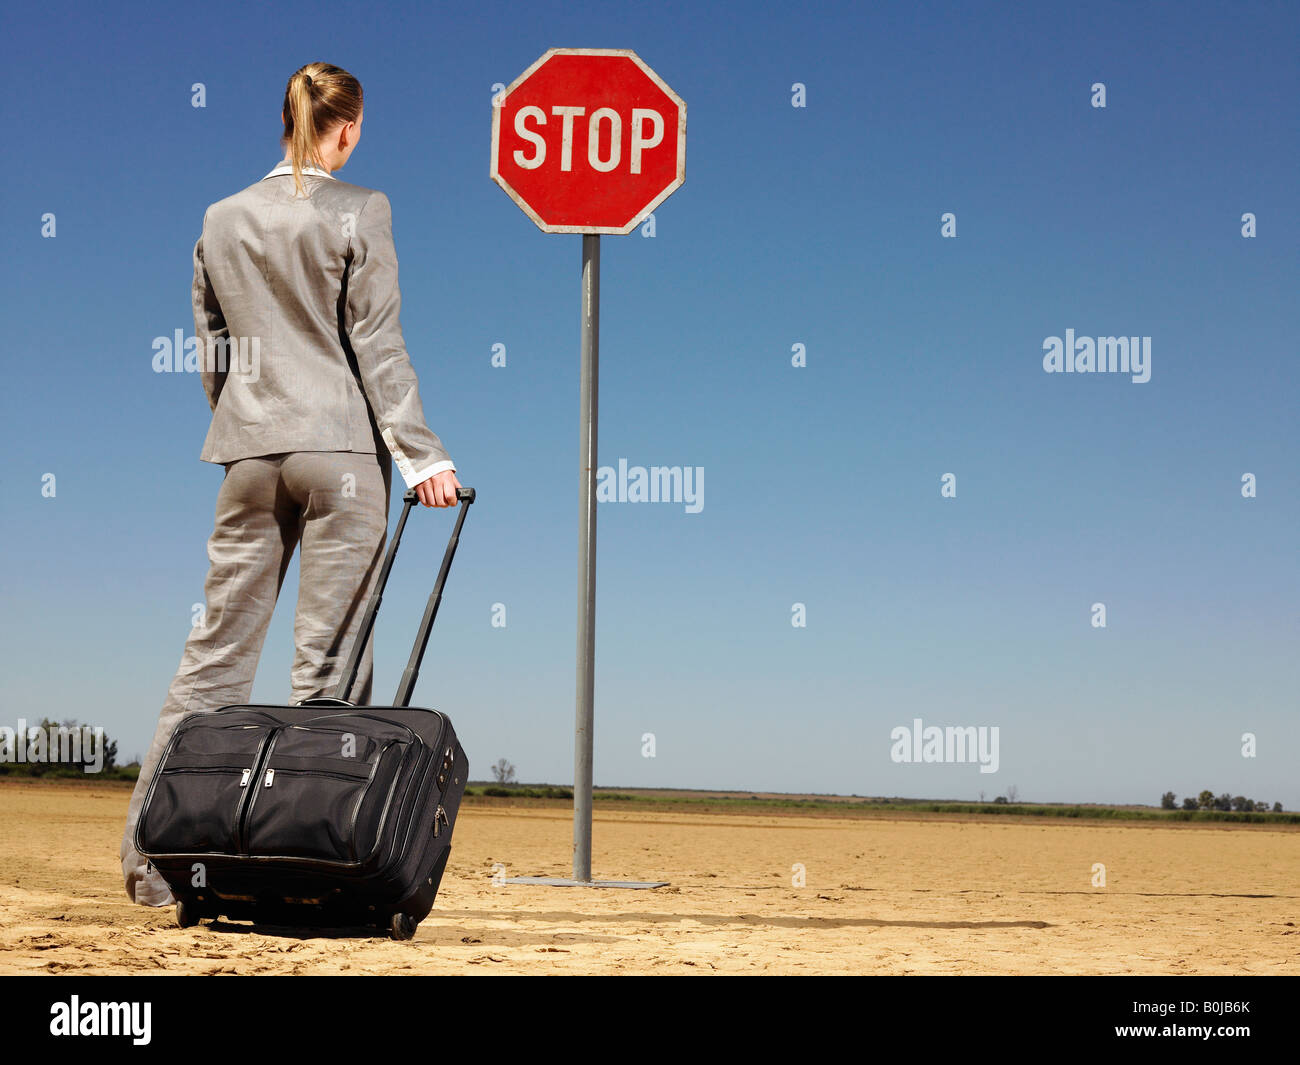 Businesswoman in Desert Looking at Stop Sign Stock Photo